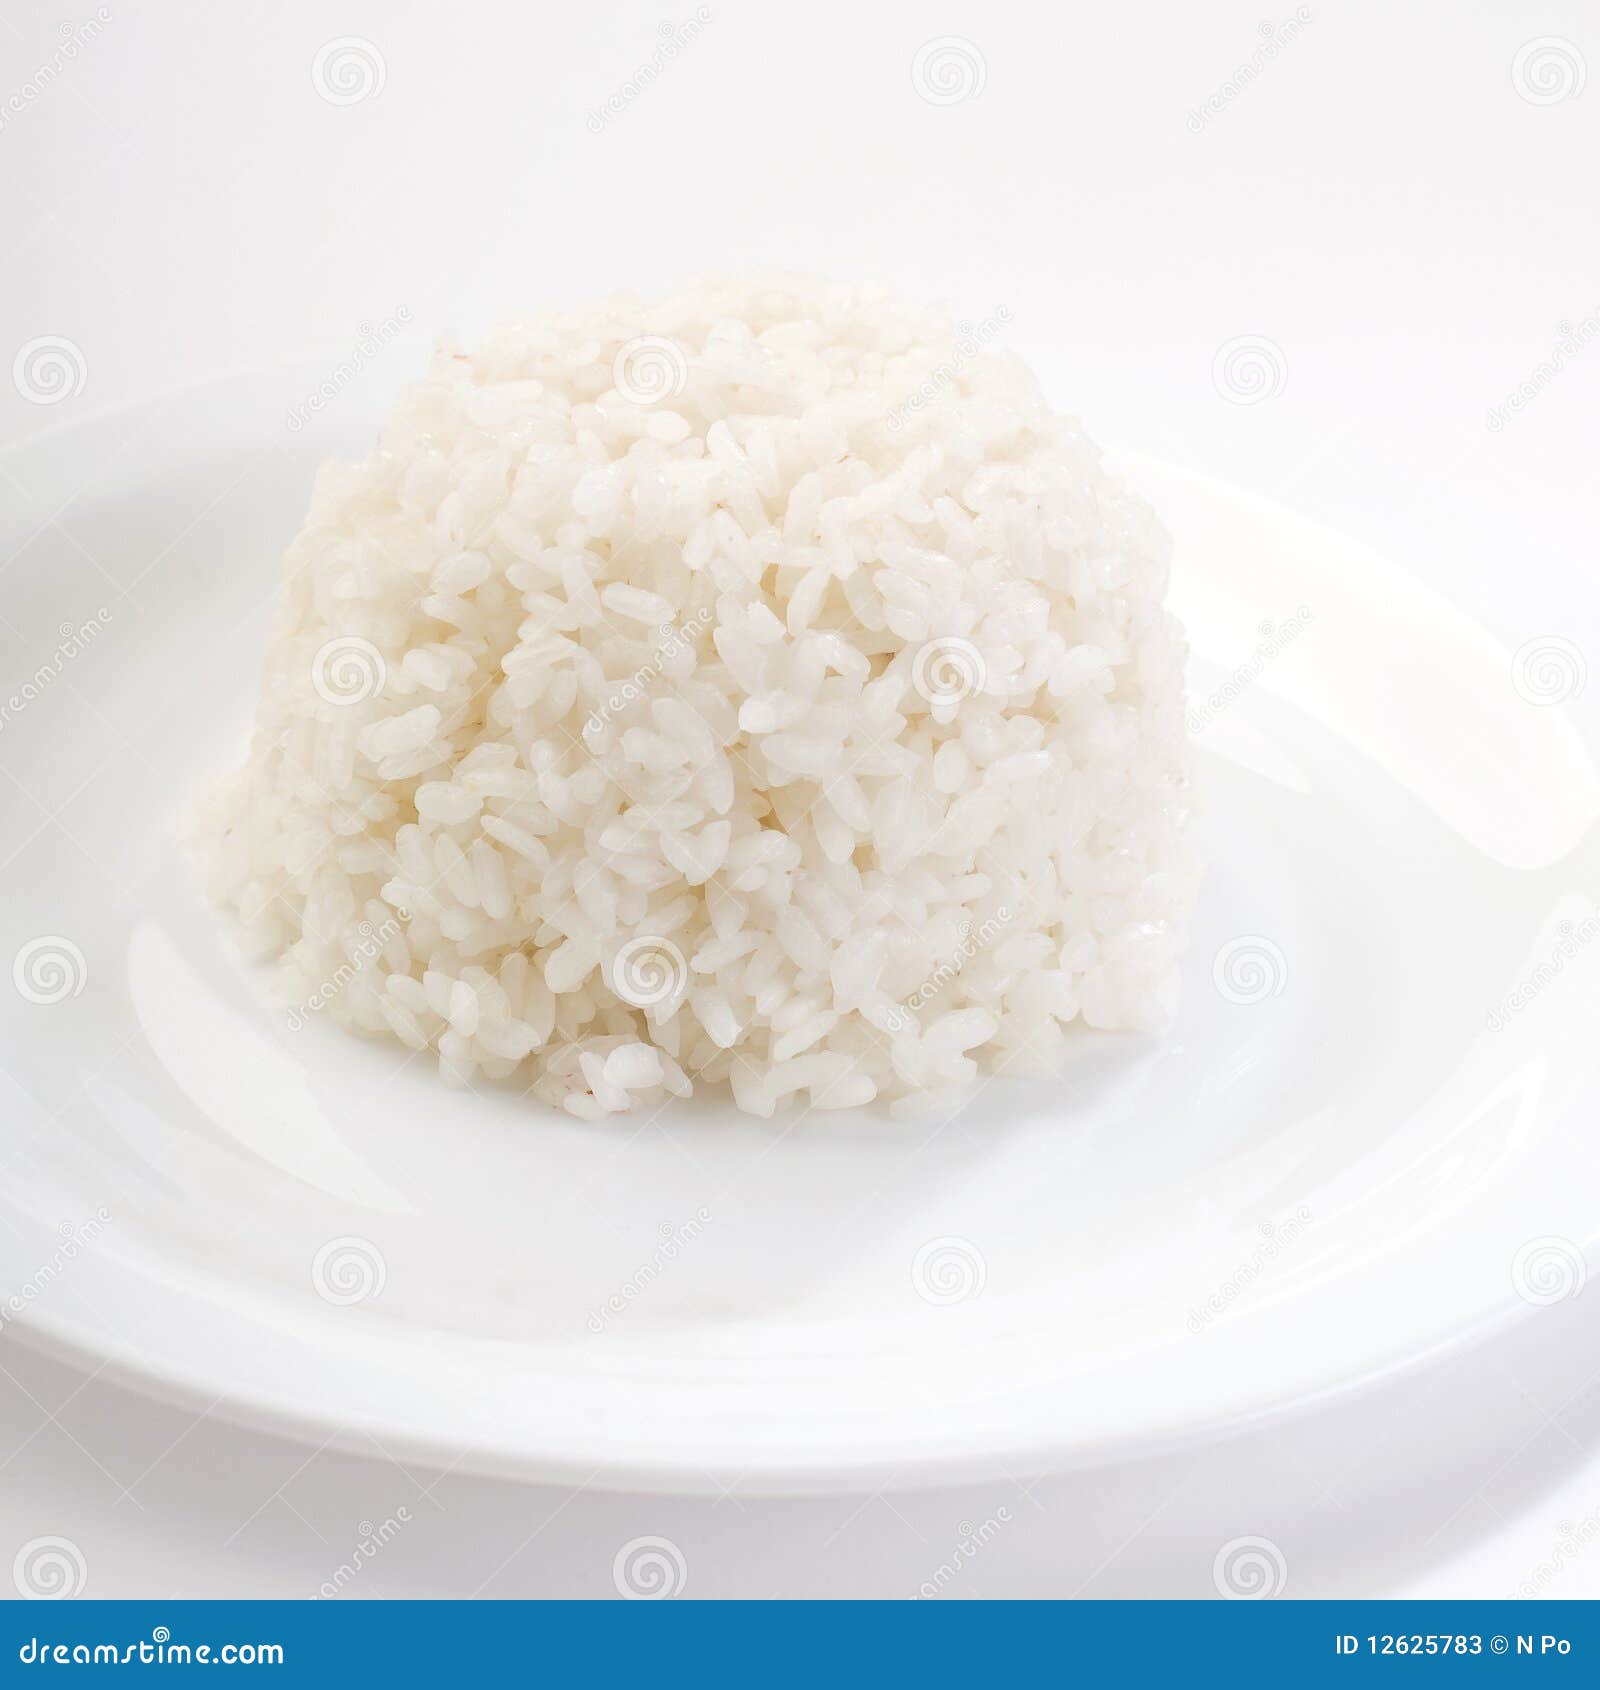 boiled rice on a white plate